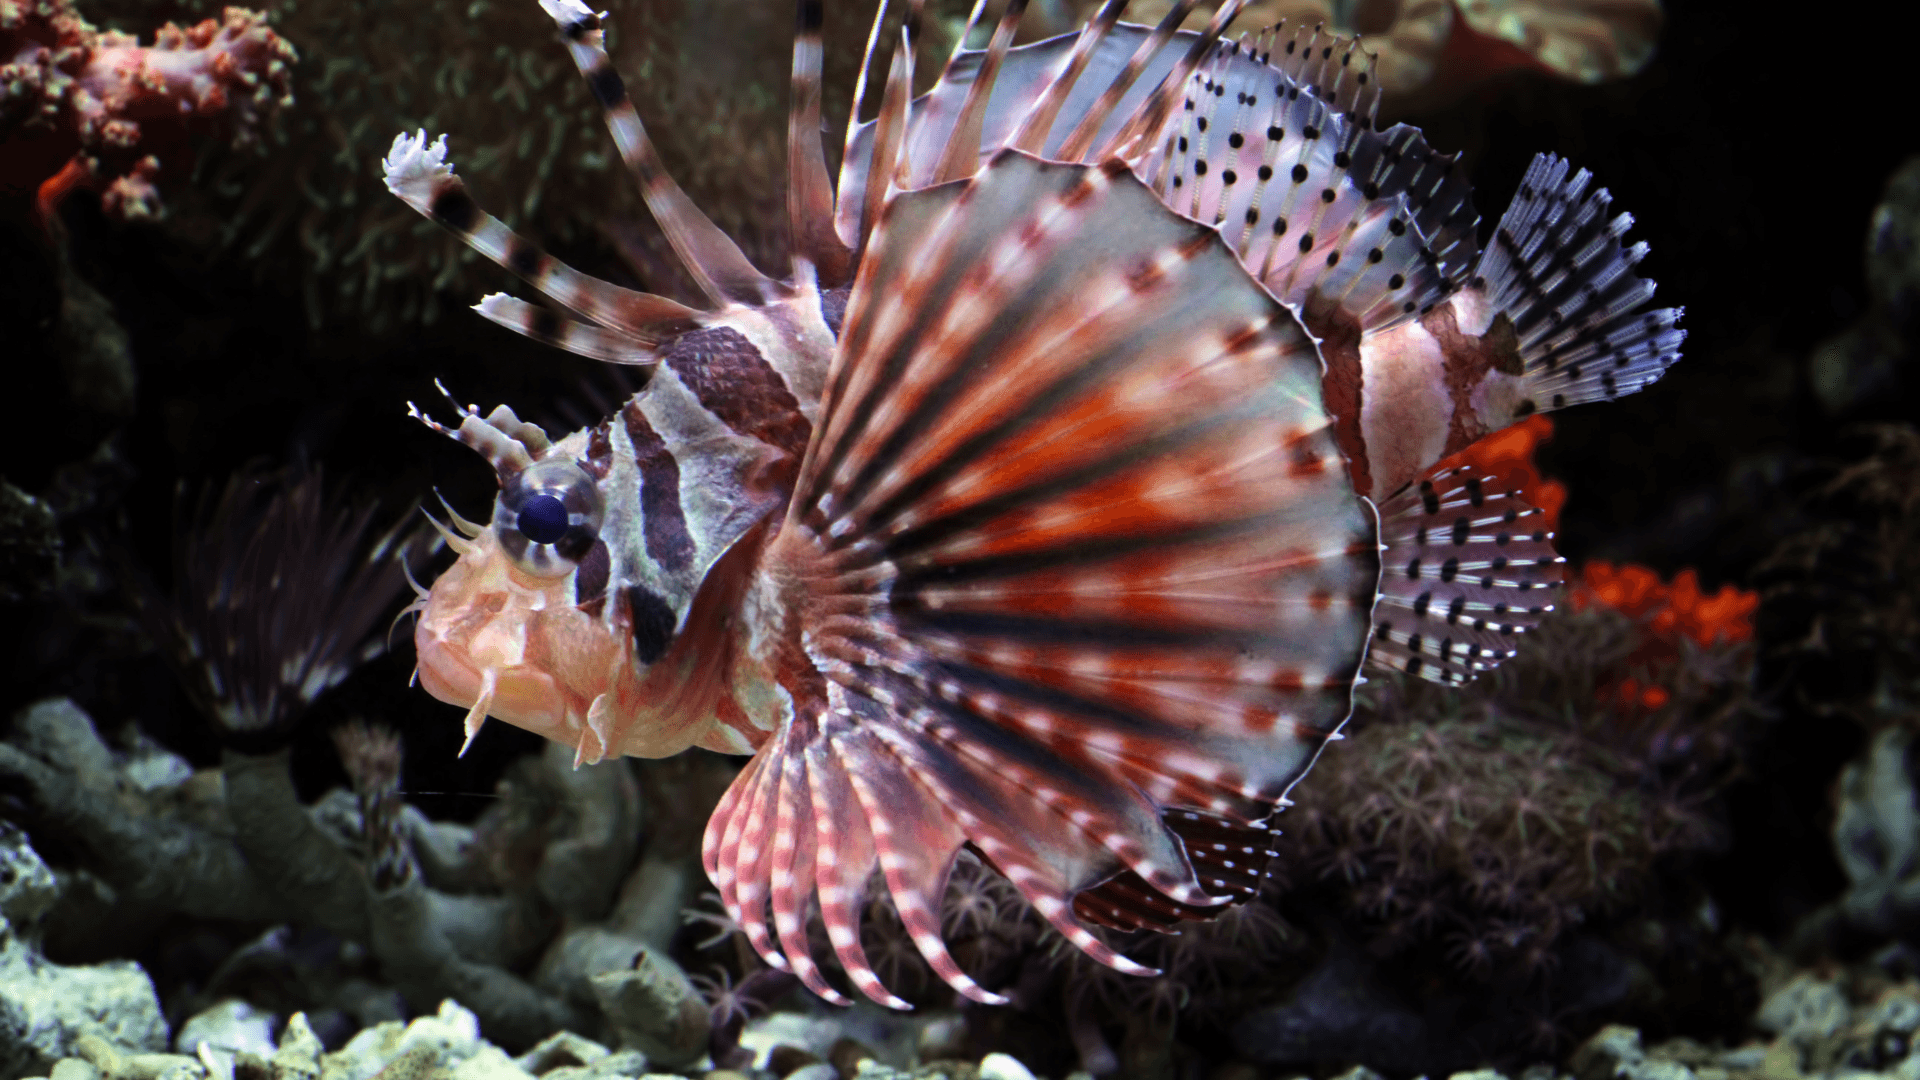 A photo of Lionfish